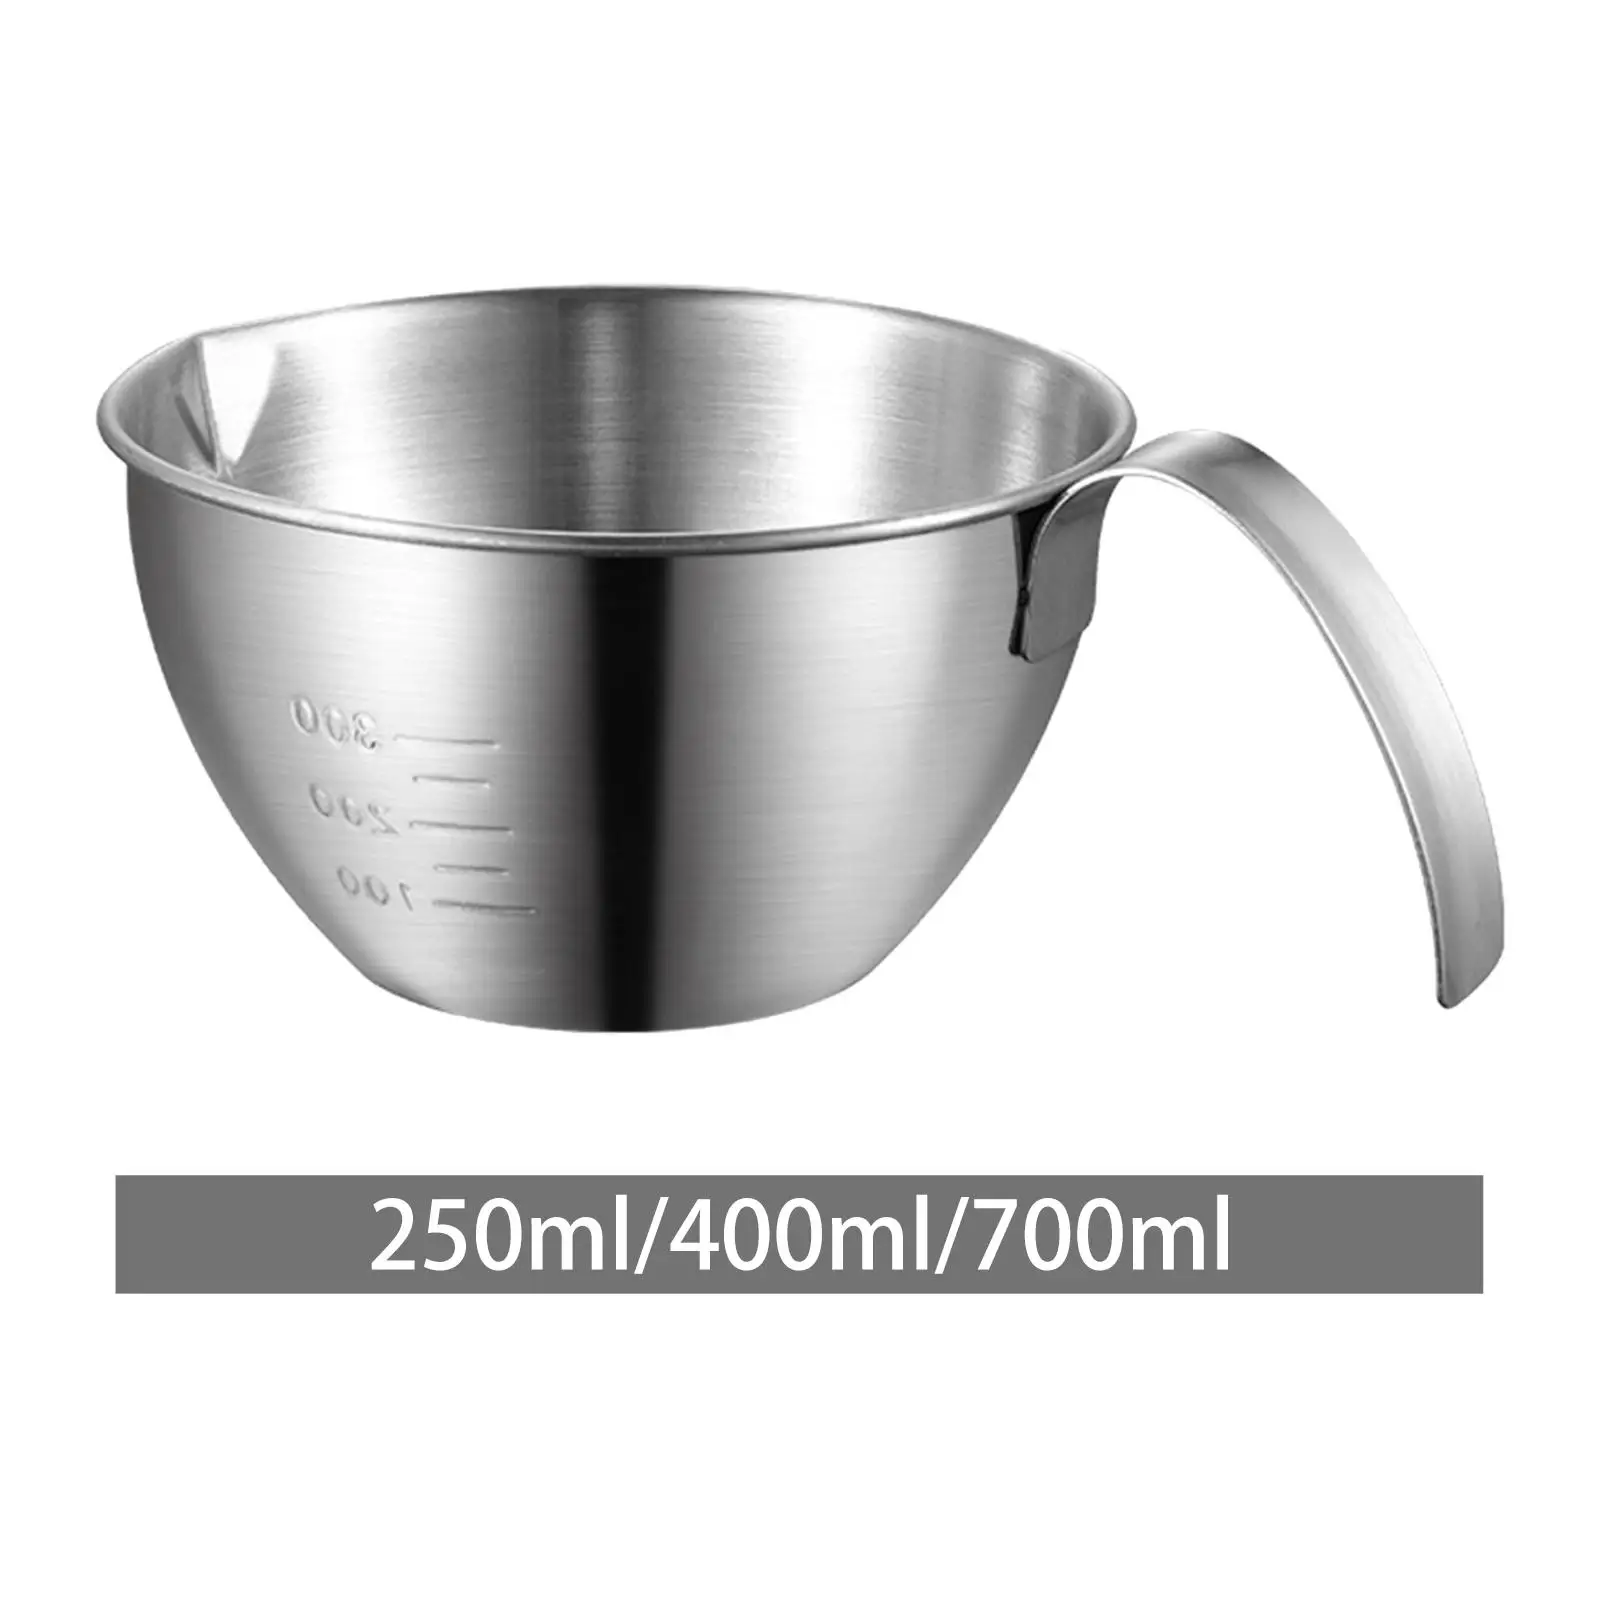 Mixing Bowl Space Saving with Scale with Spout Baking Accessory Metal Bowl for Food Storage Snacks Kitchen Prepping Baking